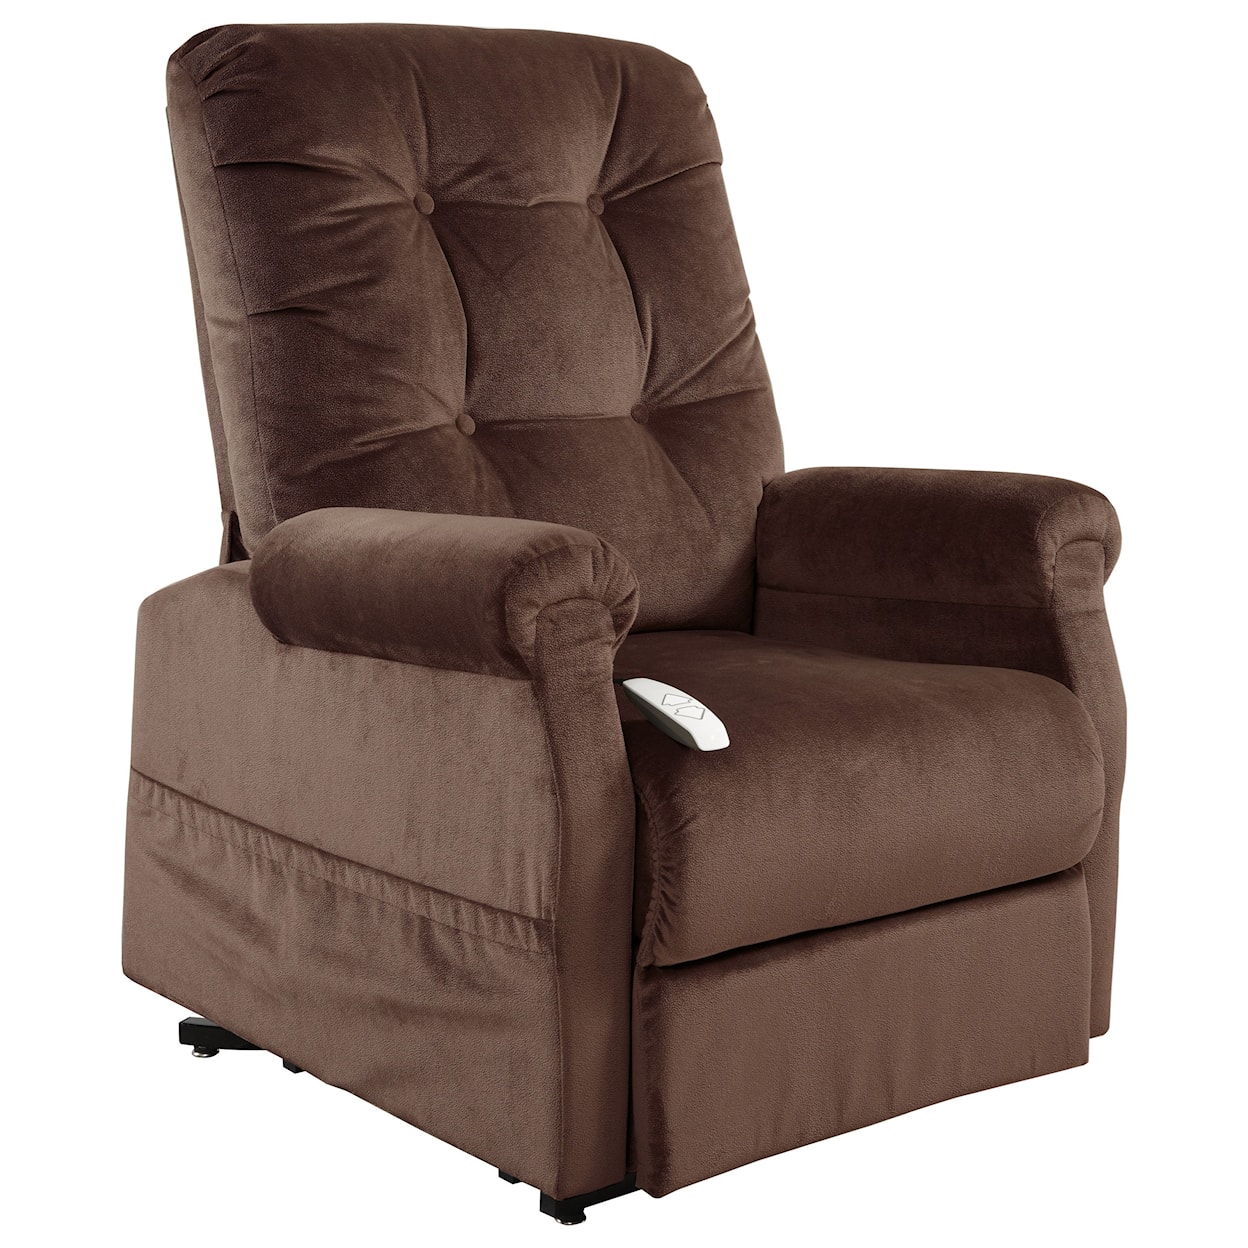 Ultimate Power Recliner Lift Chairs 3-Position Reclining Lift Chair